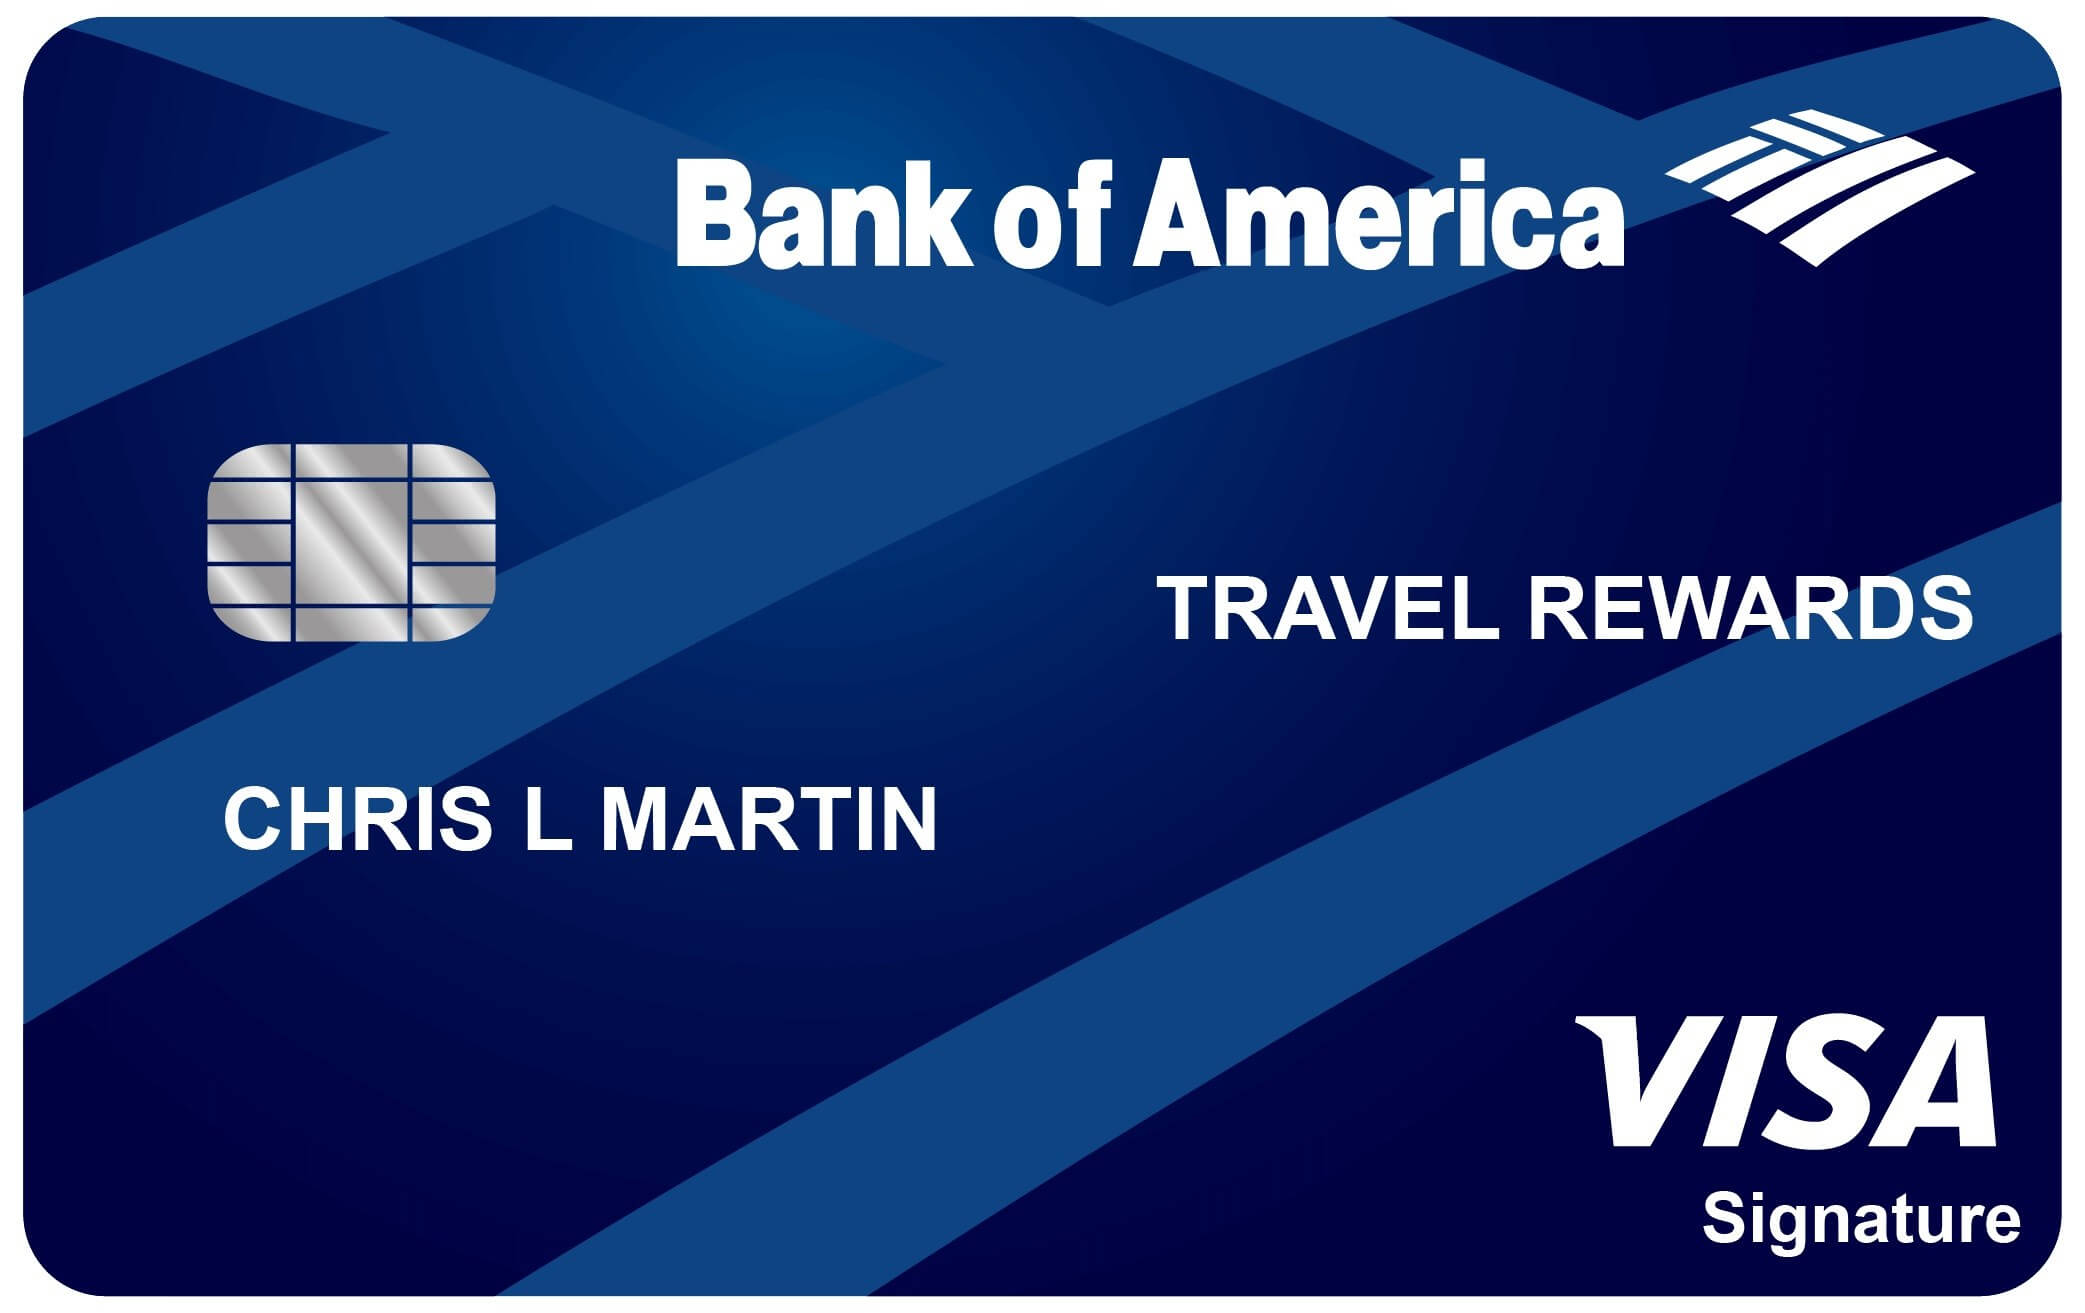 Want a credit card that wont let you down, that can provide travel rewards, benefits, and discounts? Bank of America Travel Rewards Credit Card is your best option Here's how to apply.